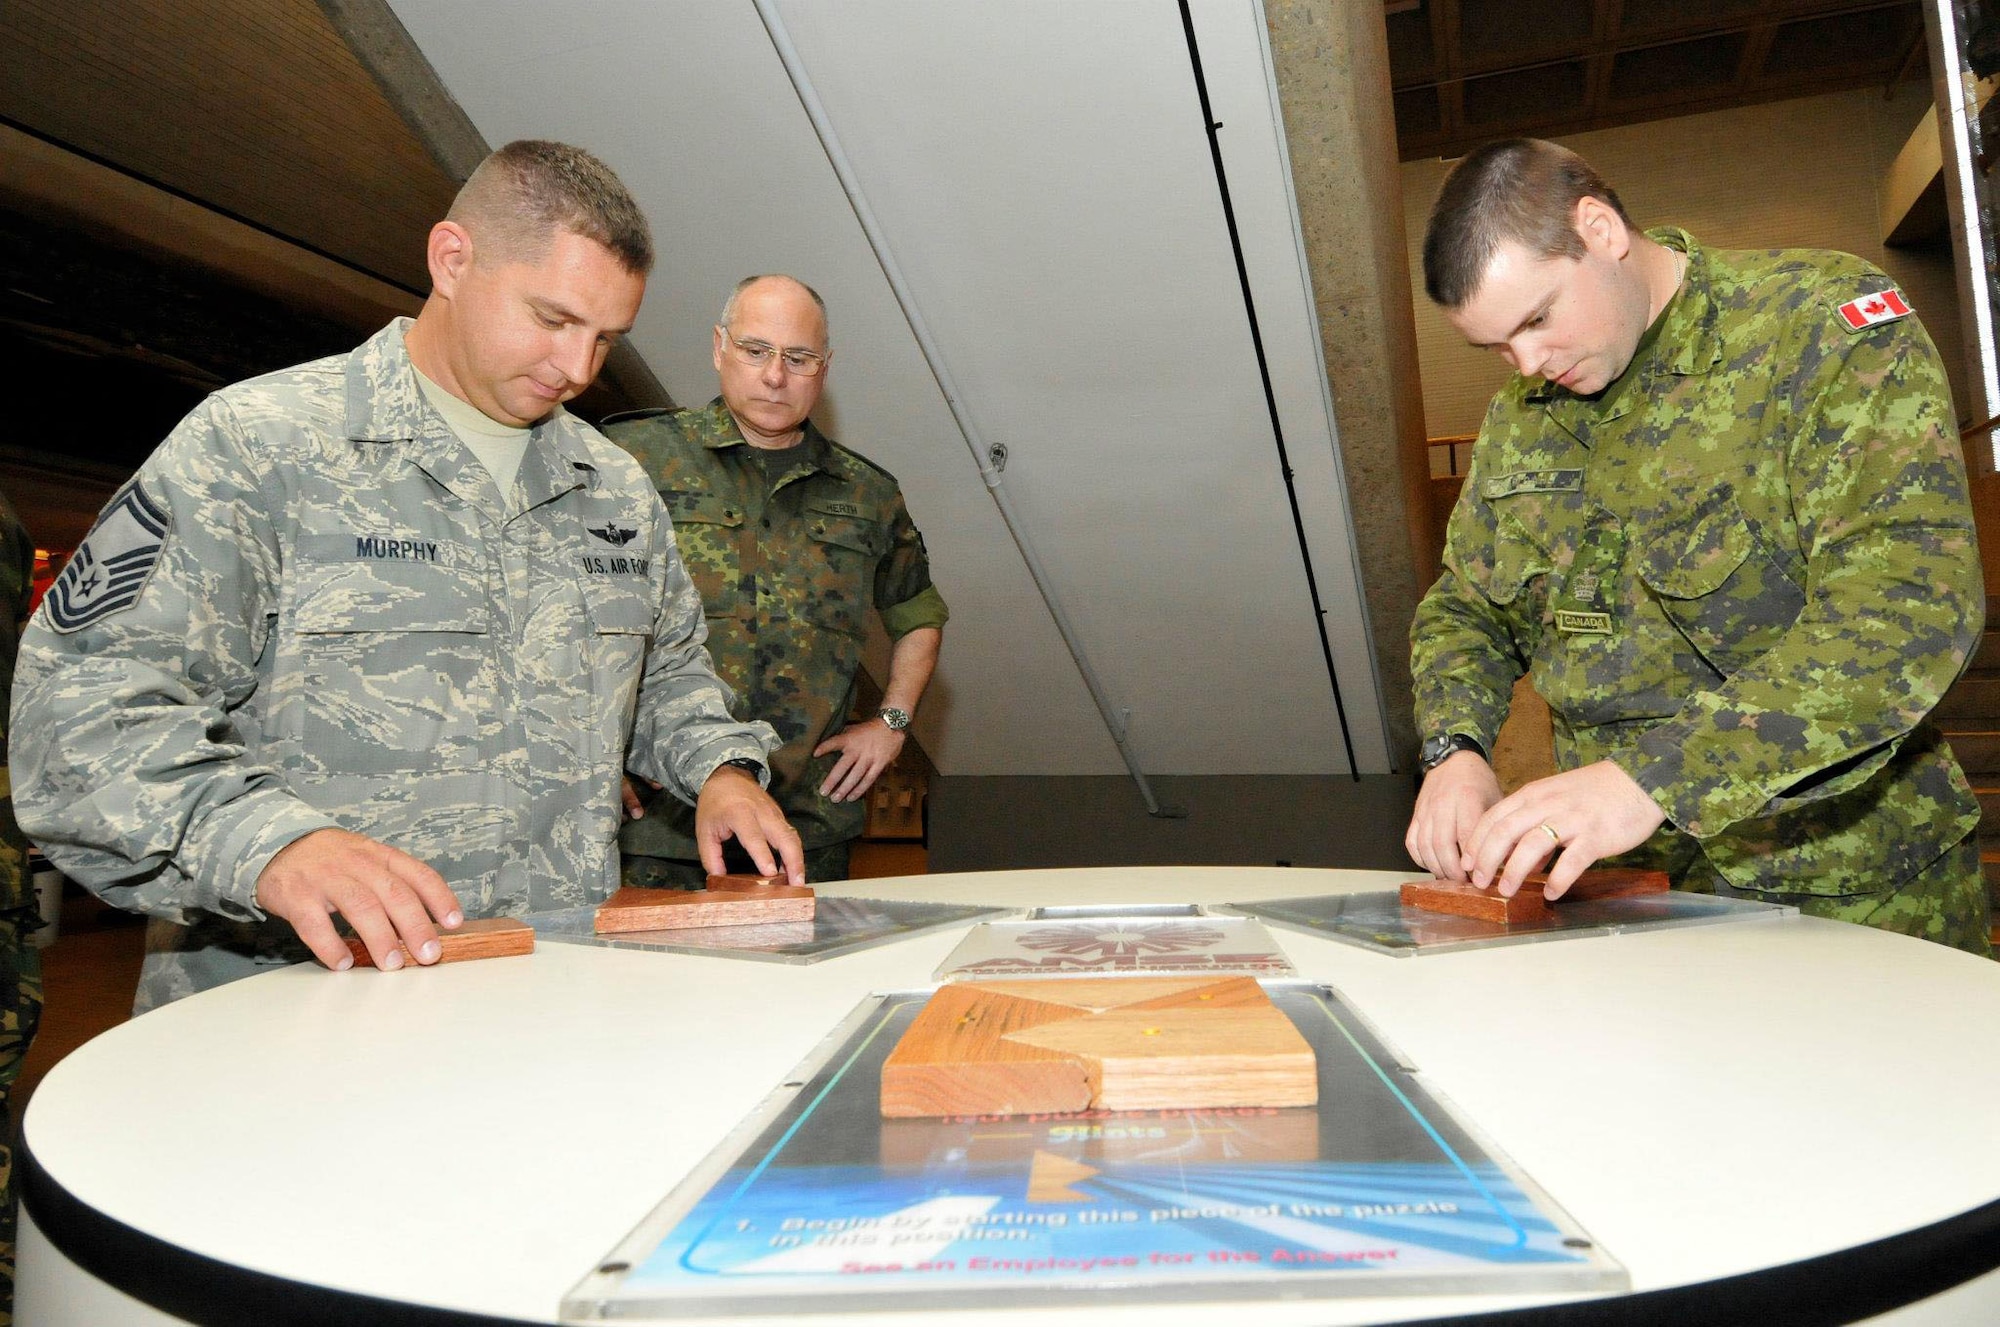 Senior Master Sgt. Mike Murphy, left, a flight engineer in the 166th Airlift Wing, Delaware Air National Guard, works on a puzzle with a fellow NATO service member from Canada during the International NCO Leadership Development Symposium (INLEAD) held July 8-13, 2012 at the Air National Guard Training and Education Center, McGhee-Tyson ANG Base, Tenn. (National Guard photo)